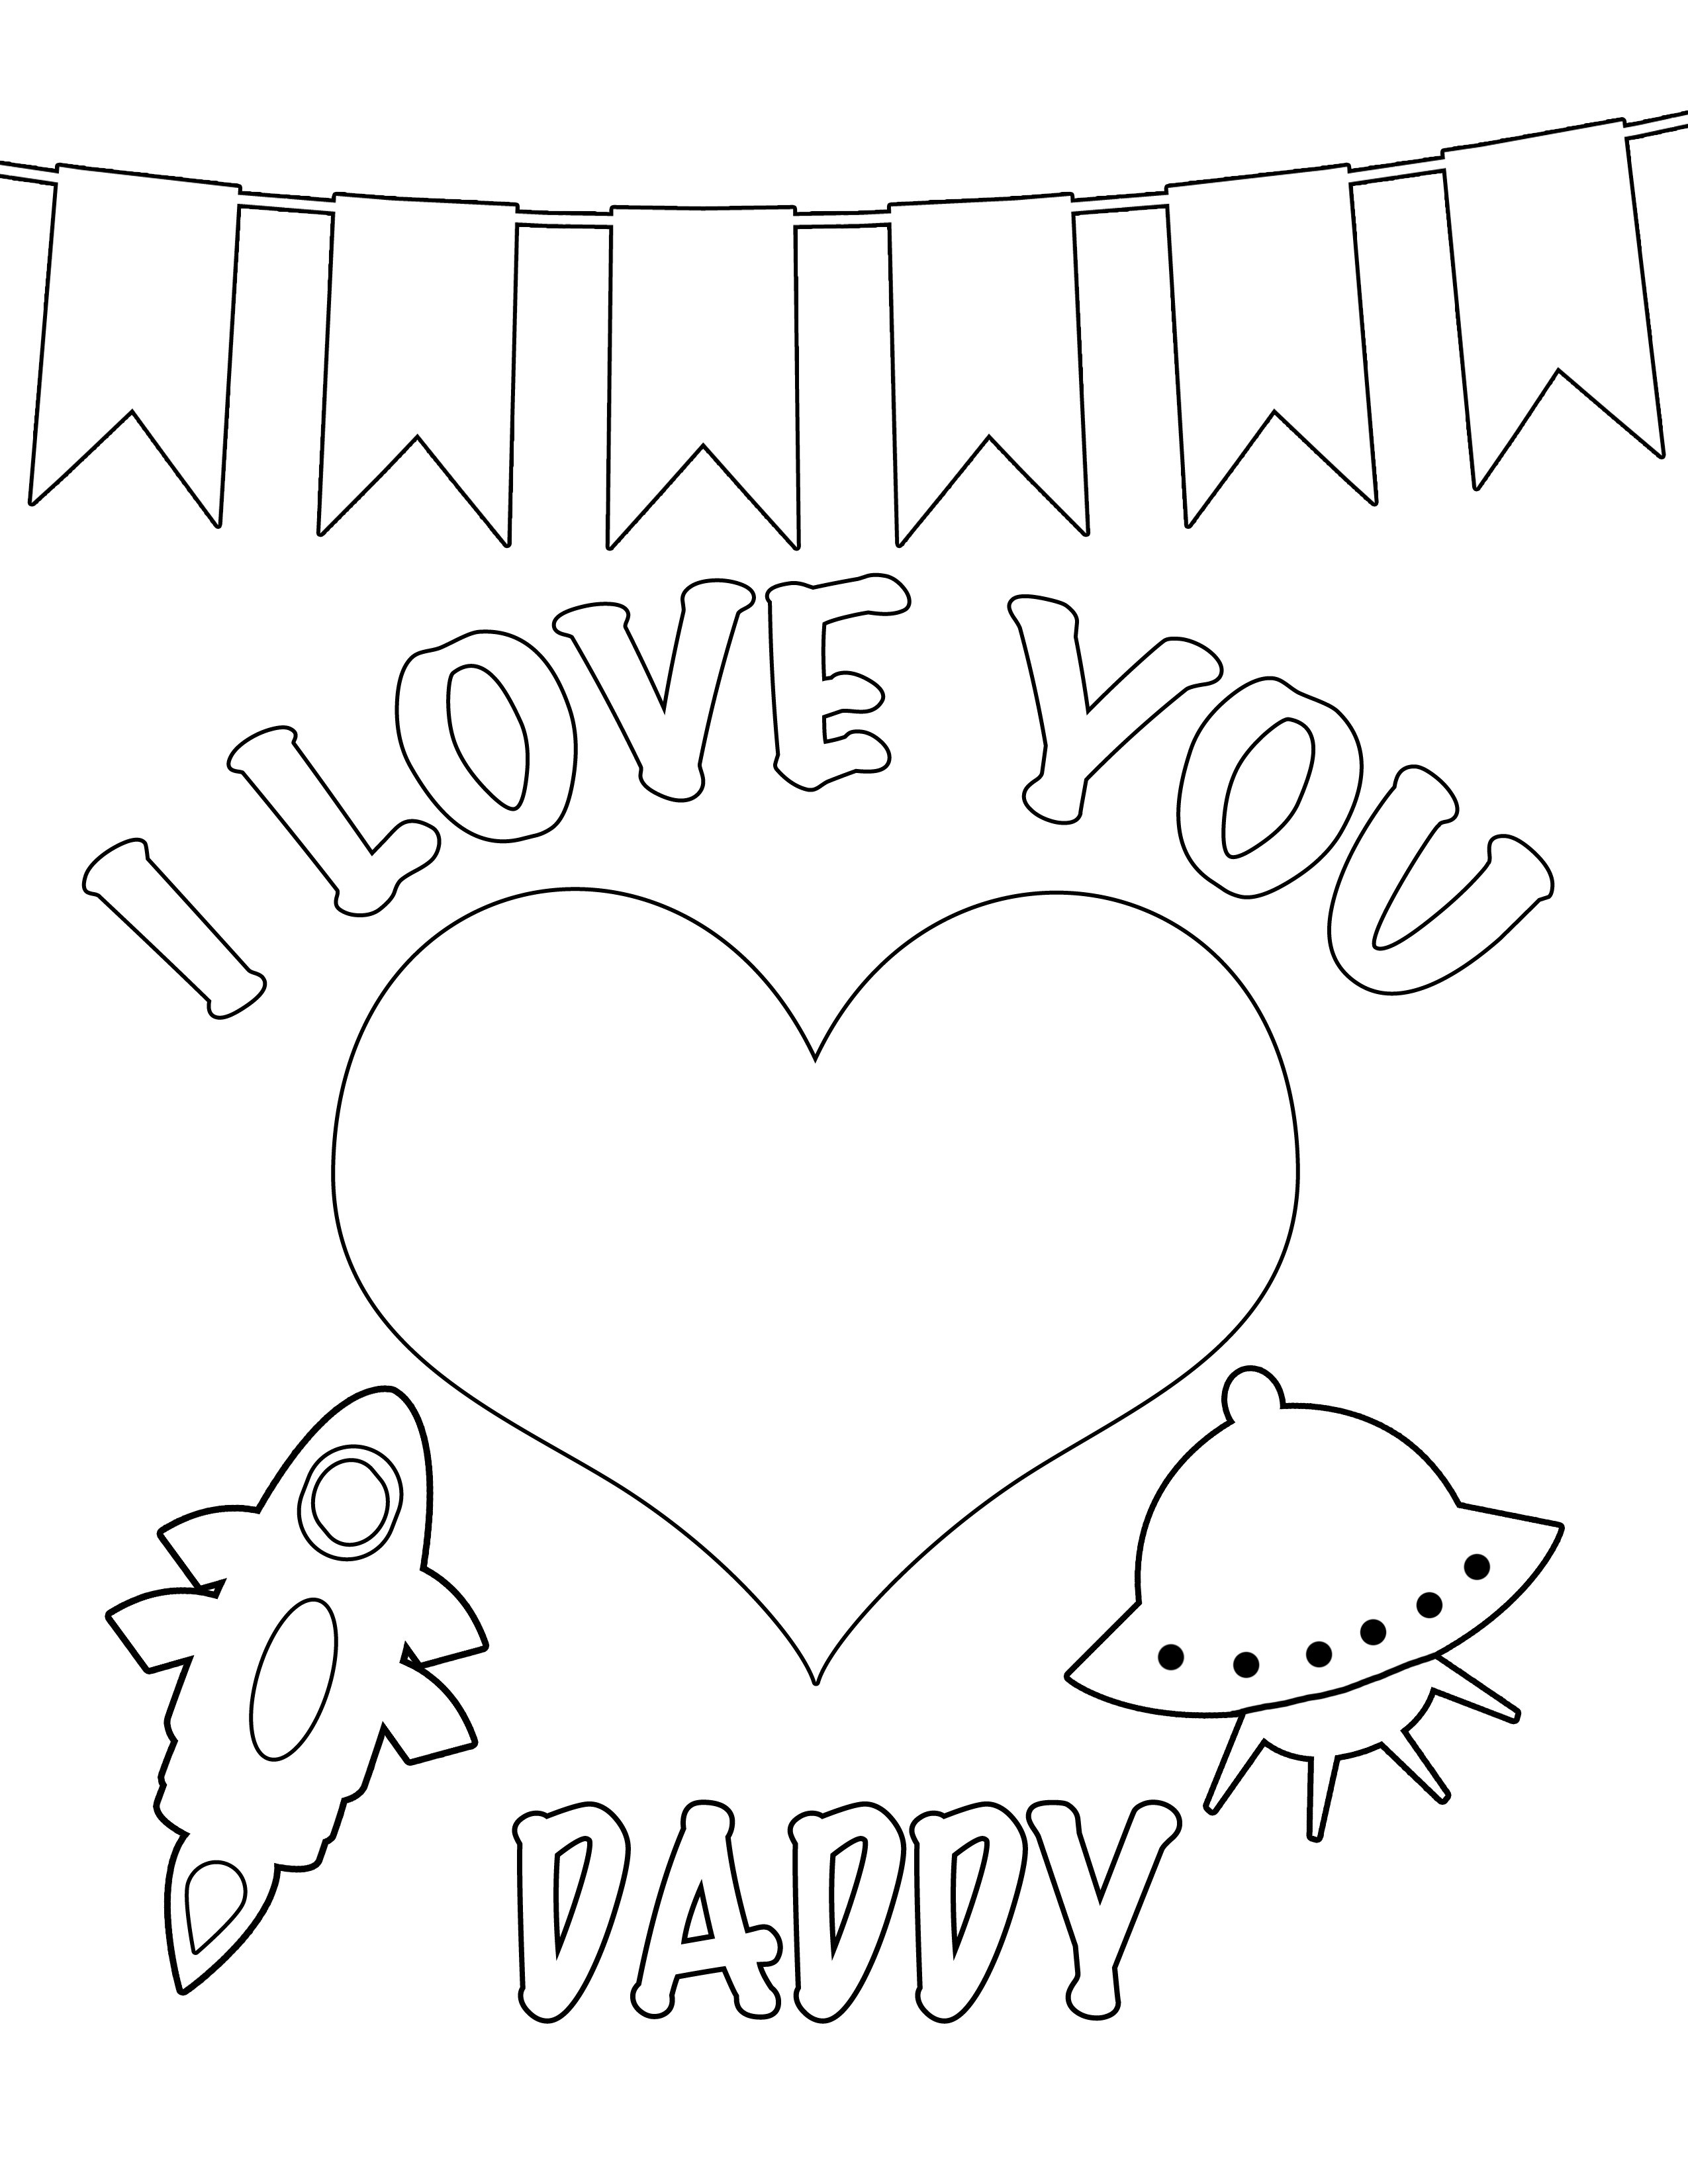 ddlg-coloring-pages-5.